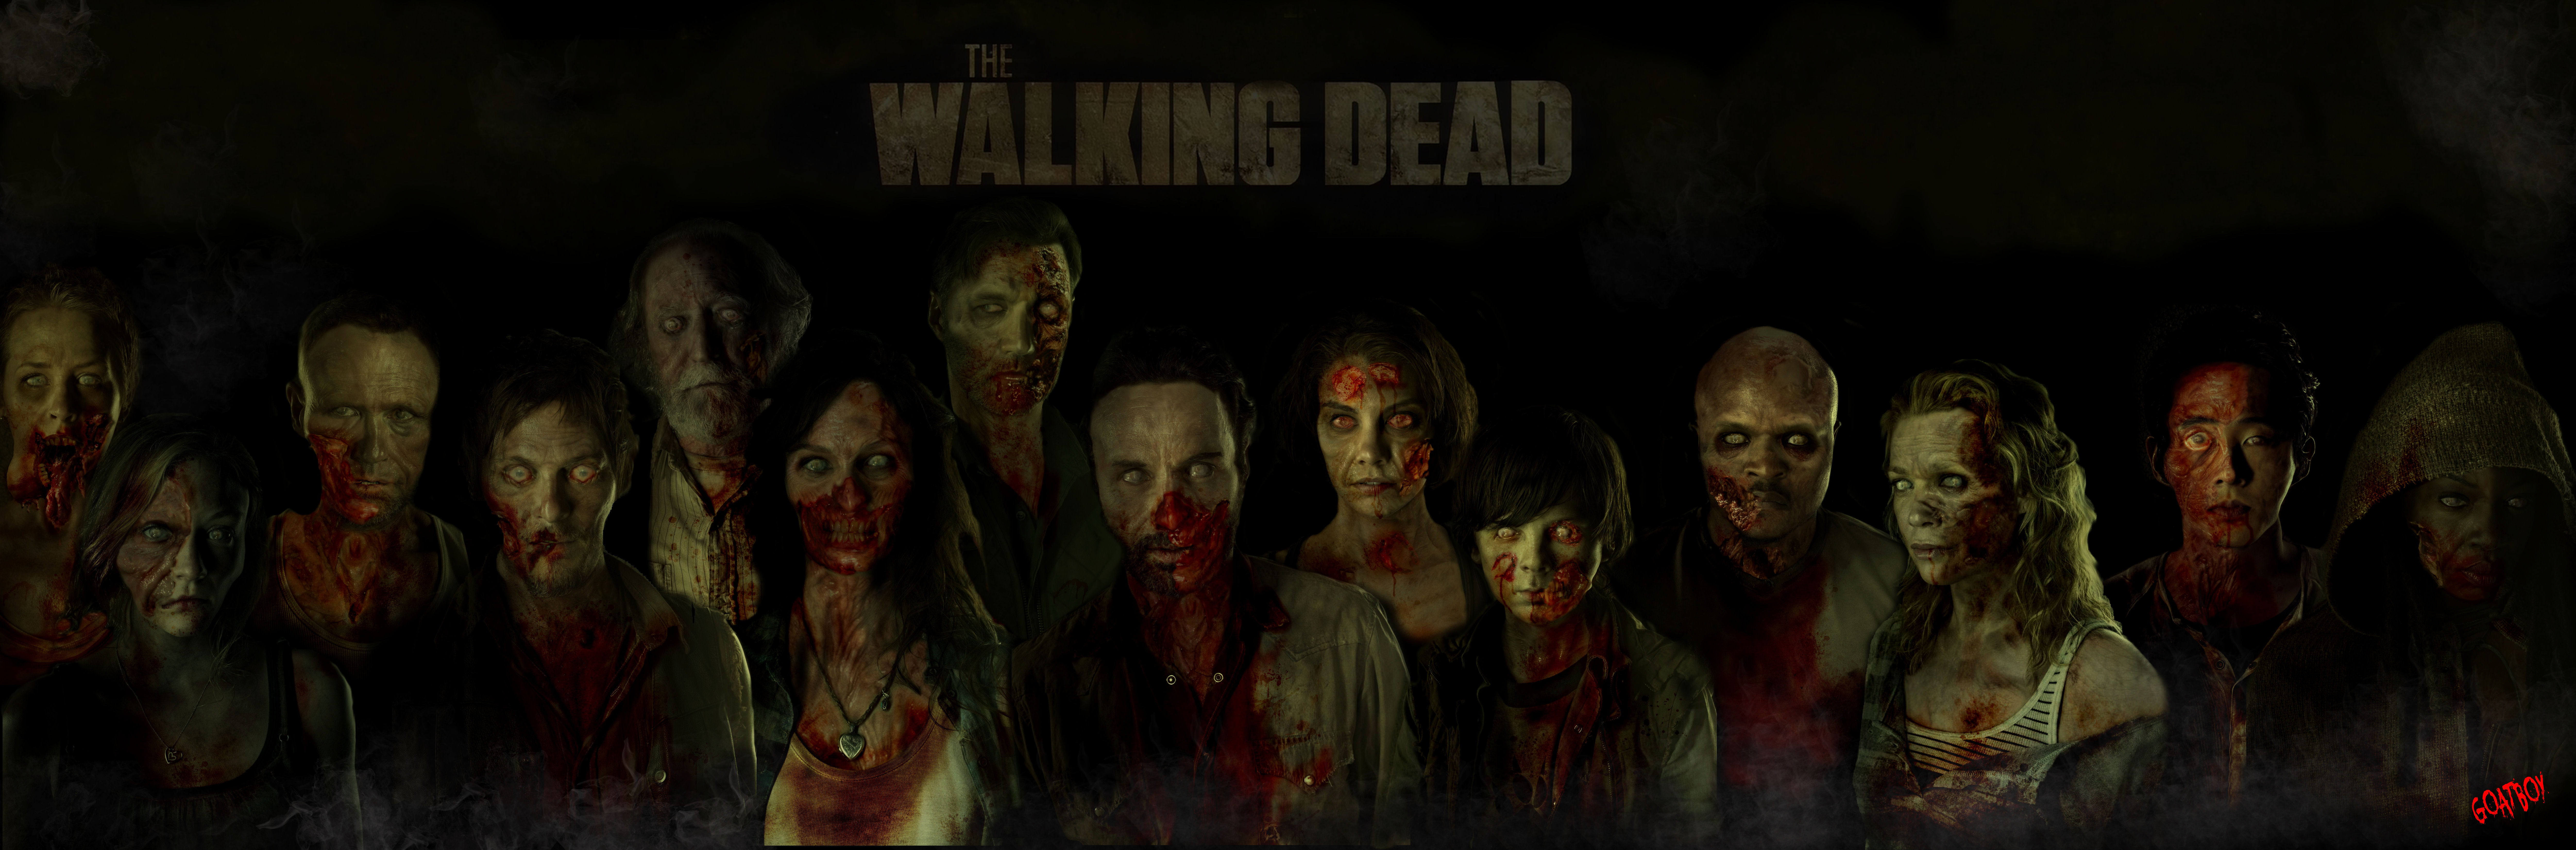 The Walking Dead Zombie Cast Wallpaper Moriarty Of Gore Home